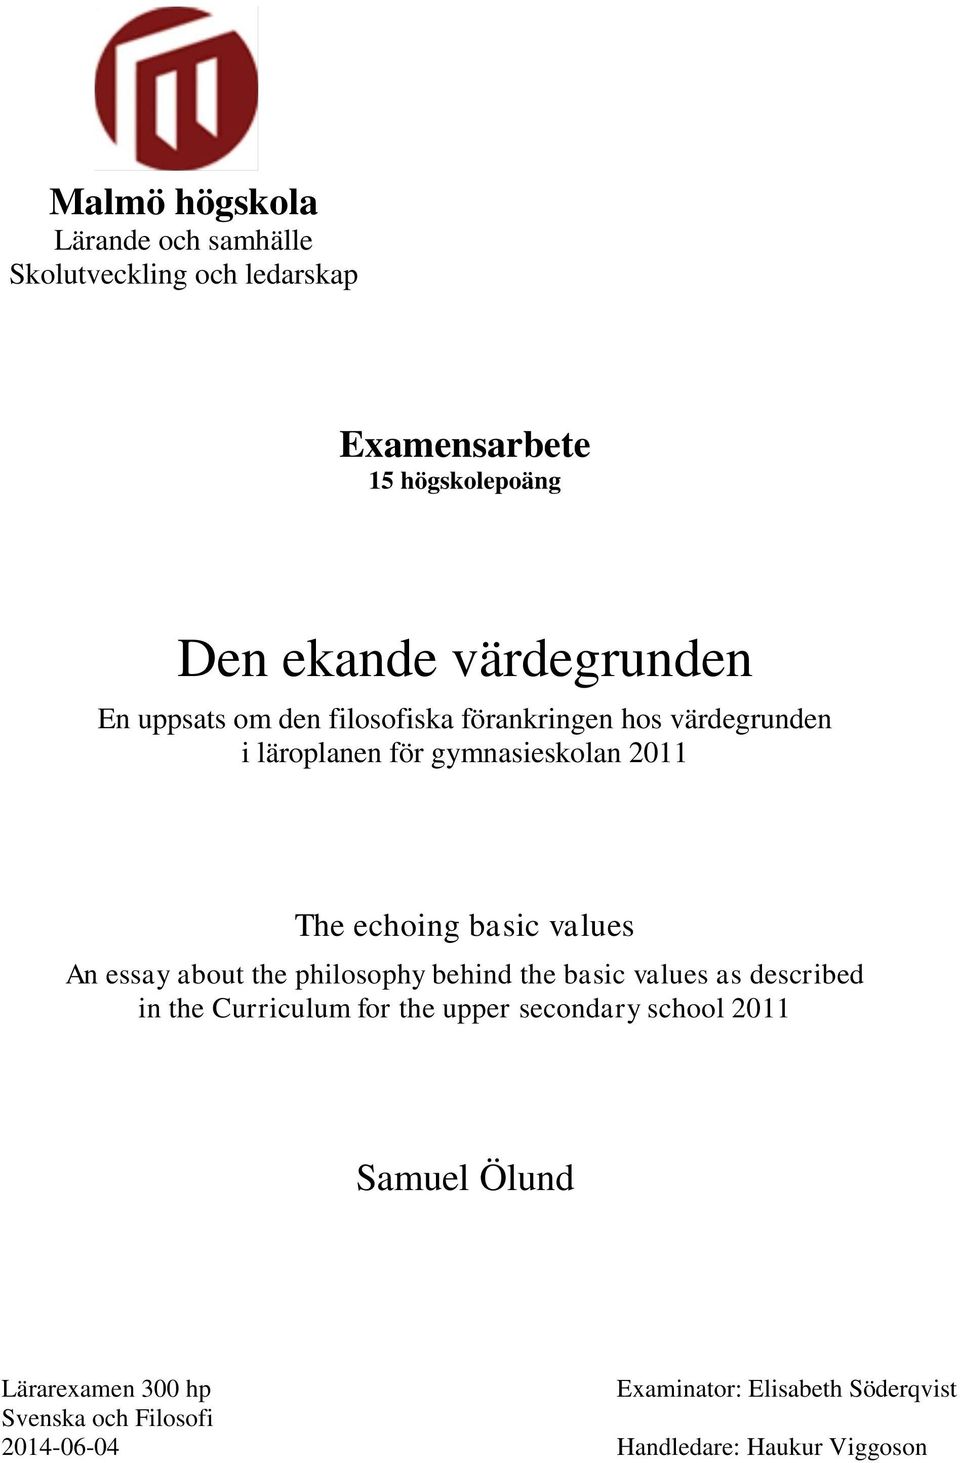 An essay about the philosophy behind the basic values as described in the Curriculum for the upper secondary school 2011